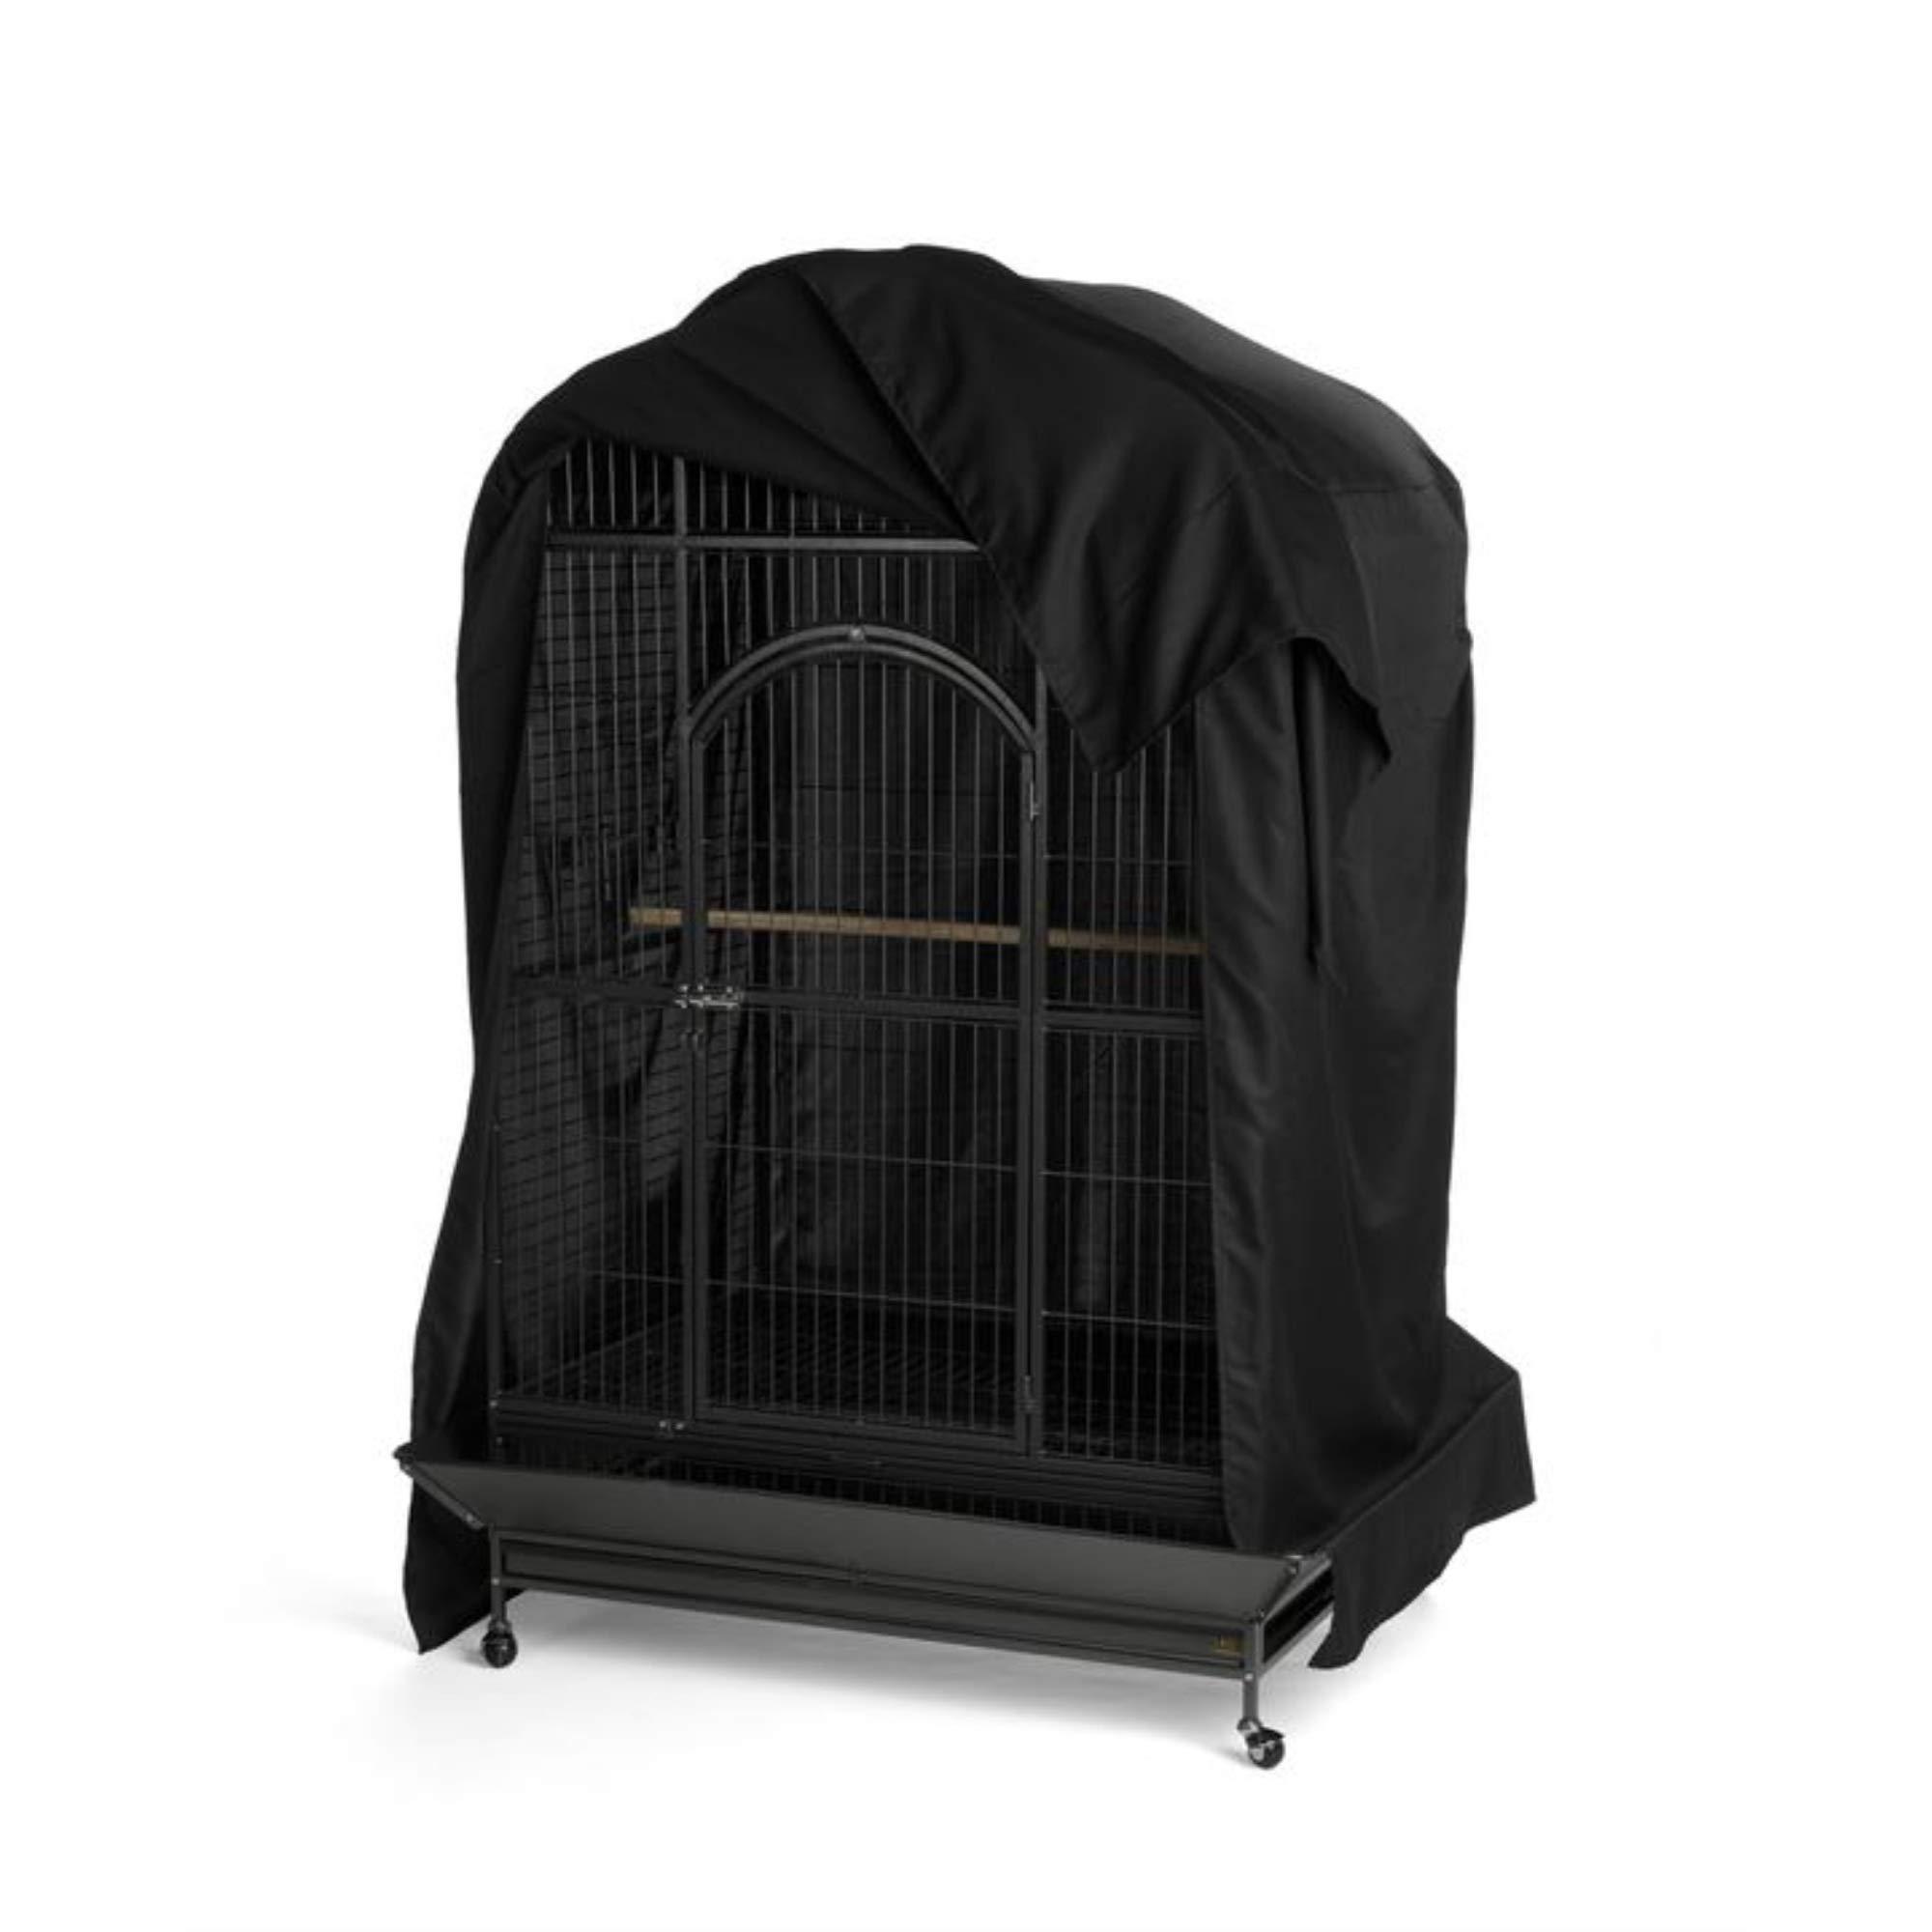 Prevue Pet Extra Large Bird Cage Cover - 12506